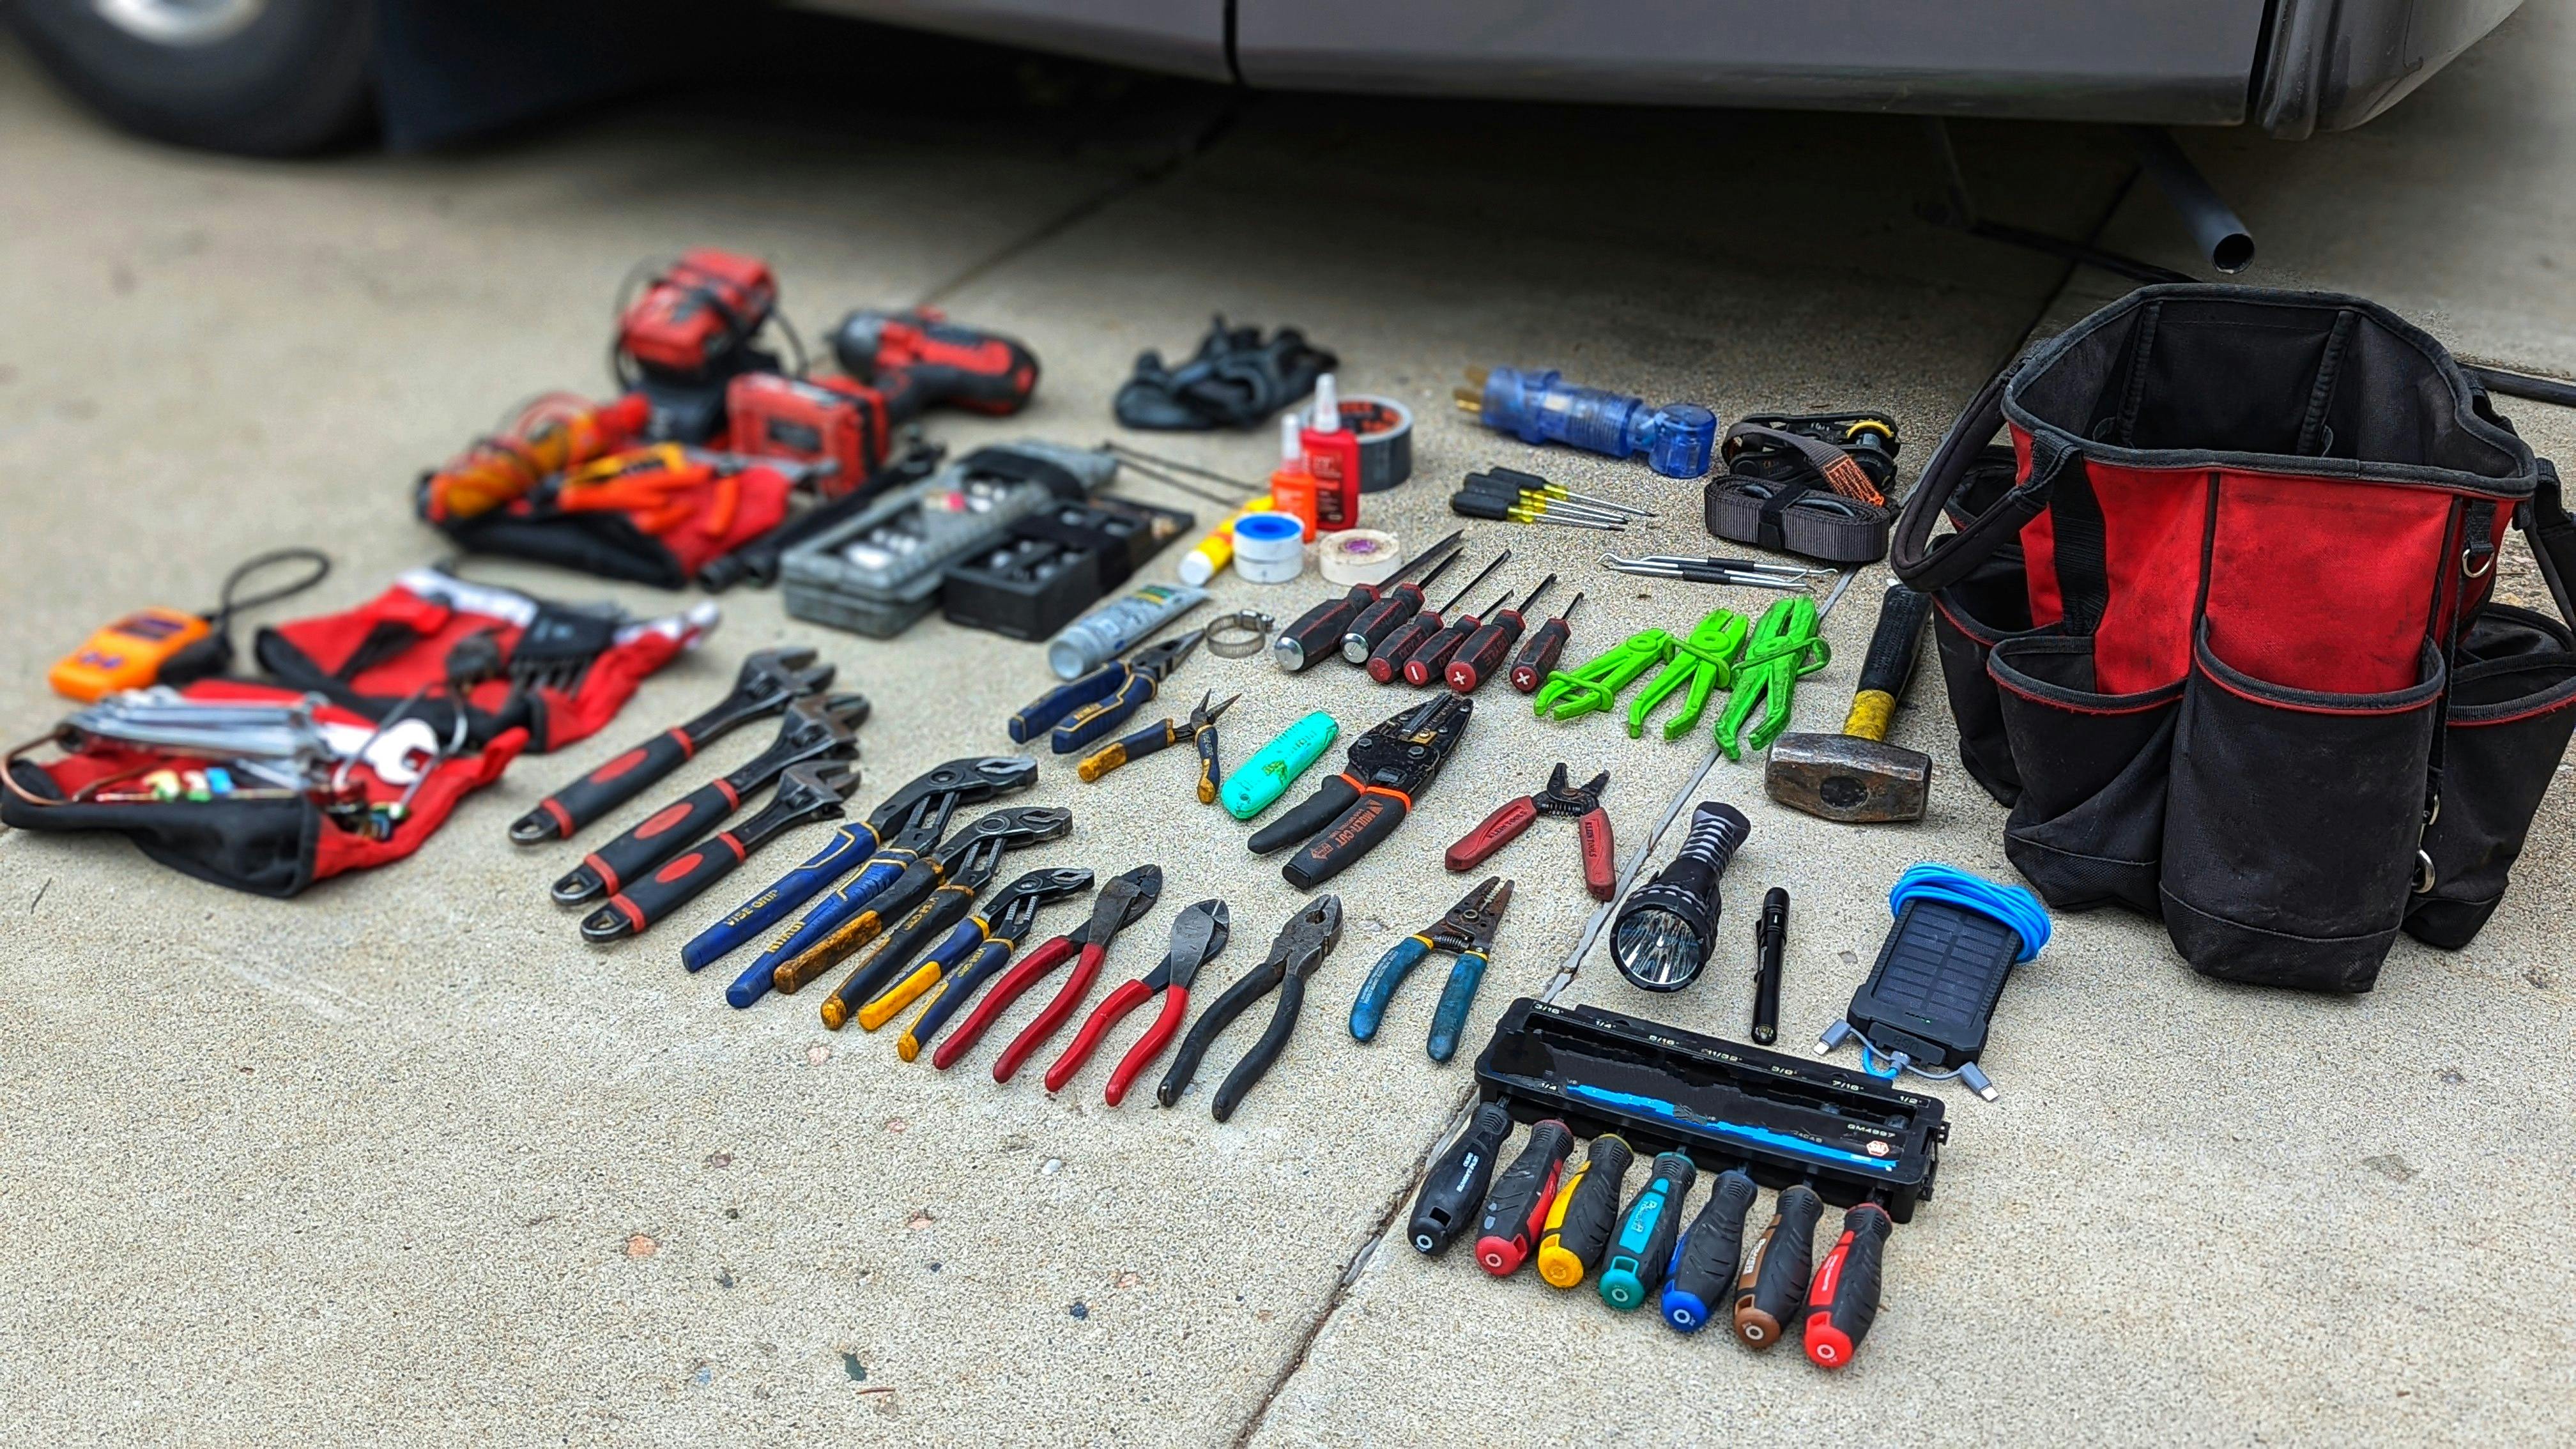 Various tools and supplies in Dustin and Sarah Bauer's emergency tool kit